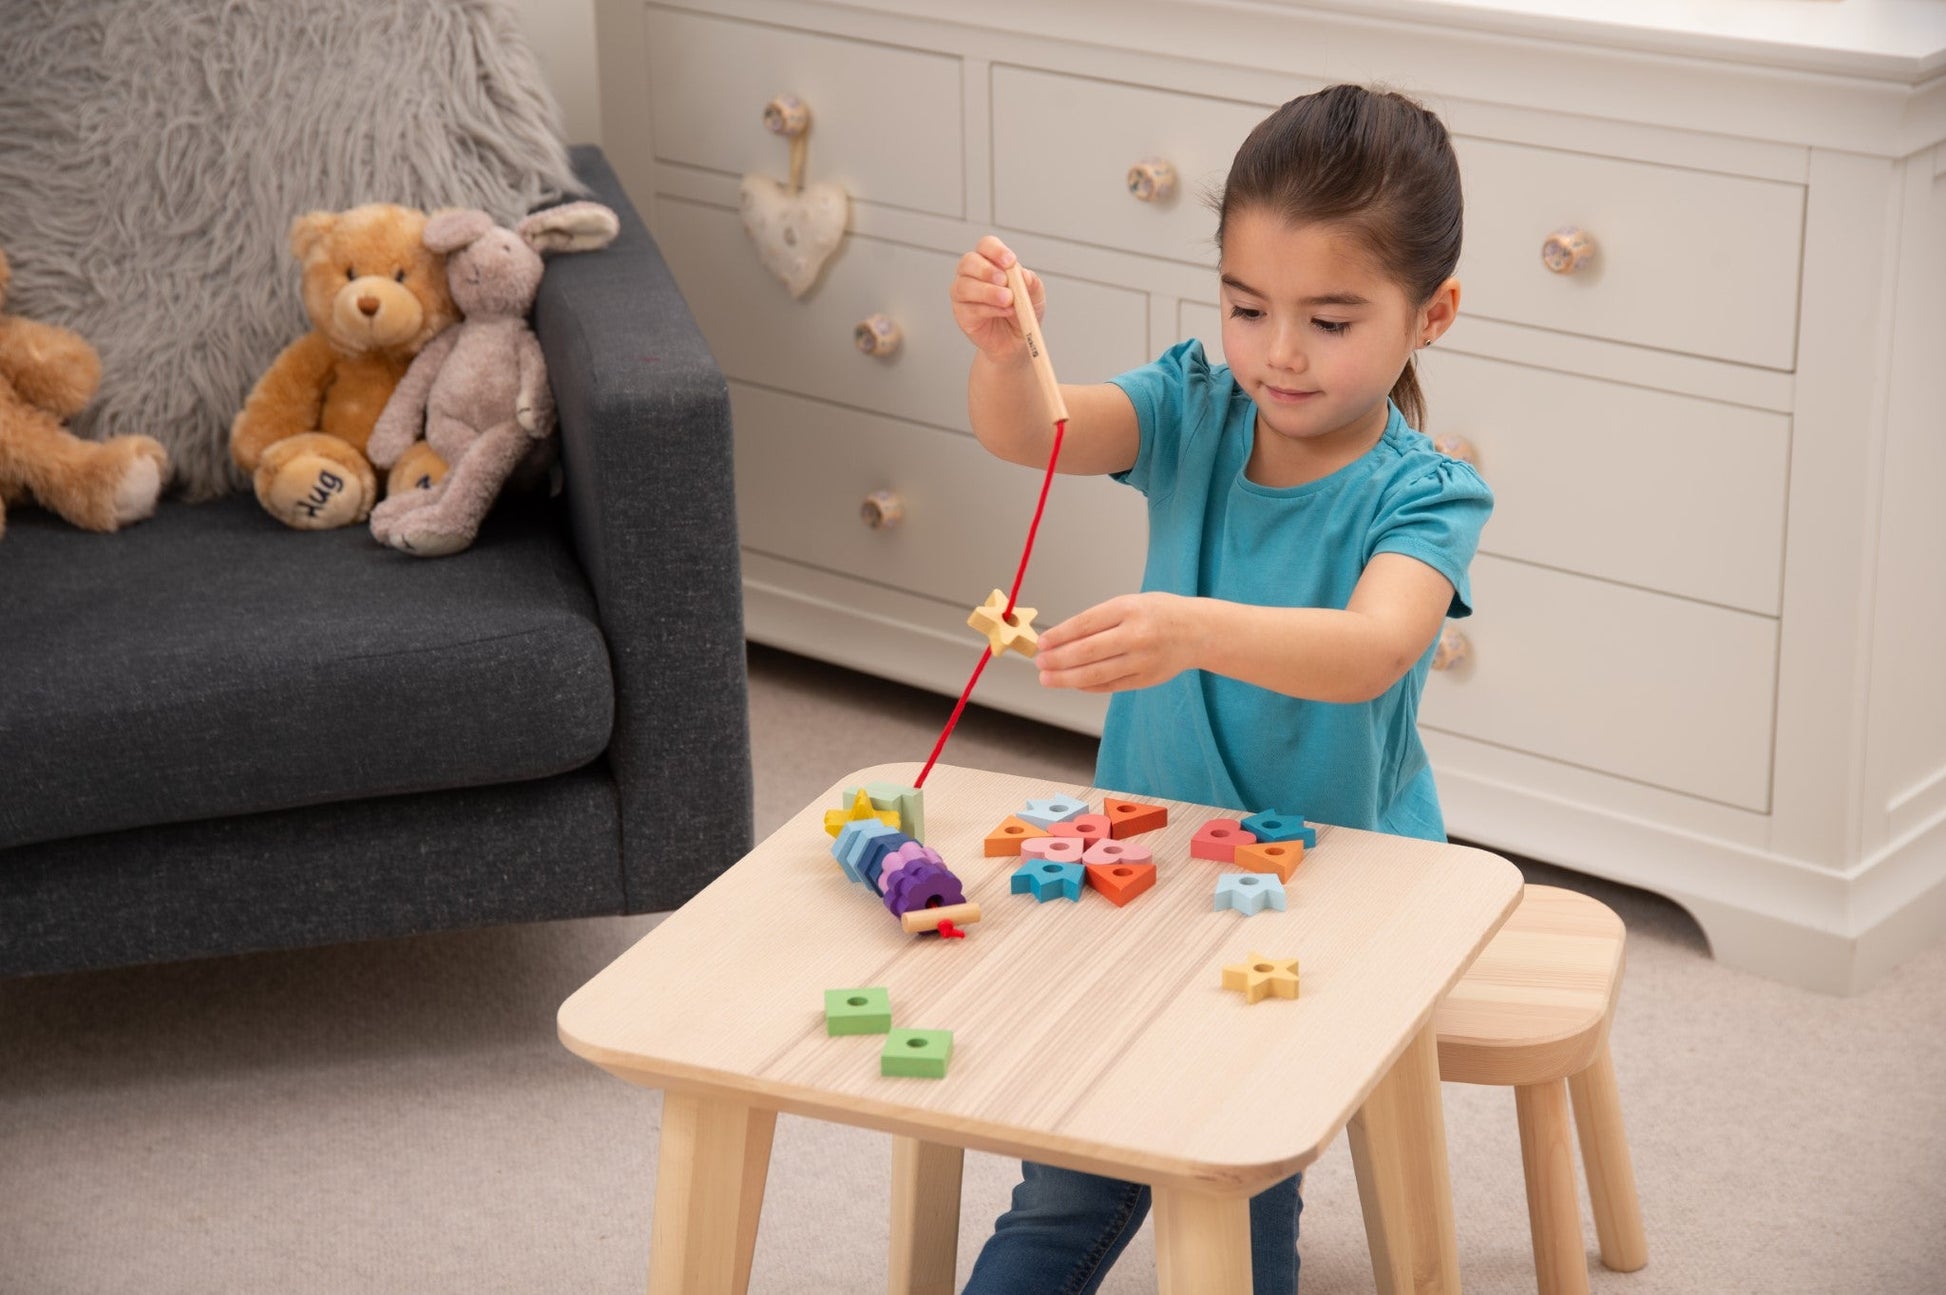 Tickit - RAINBOW WOODEN LACING SHAPES 28st - Playlaan